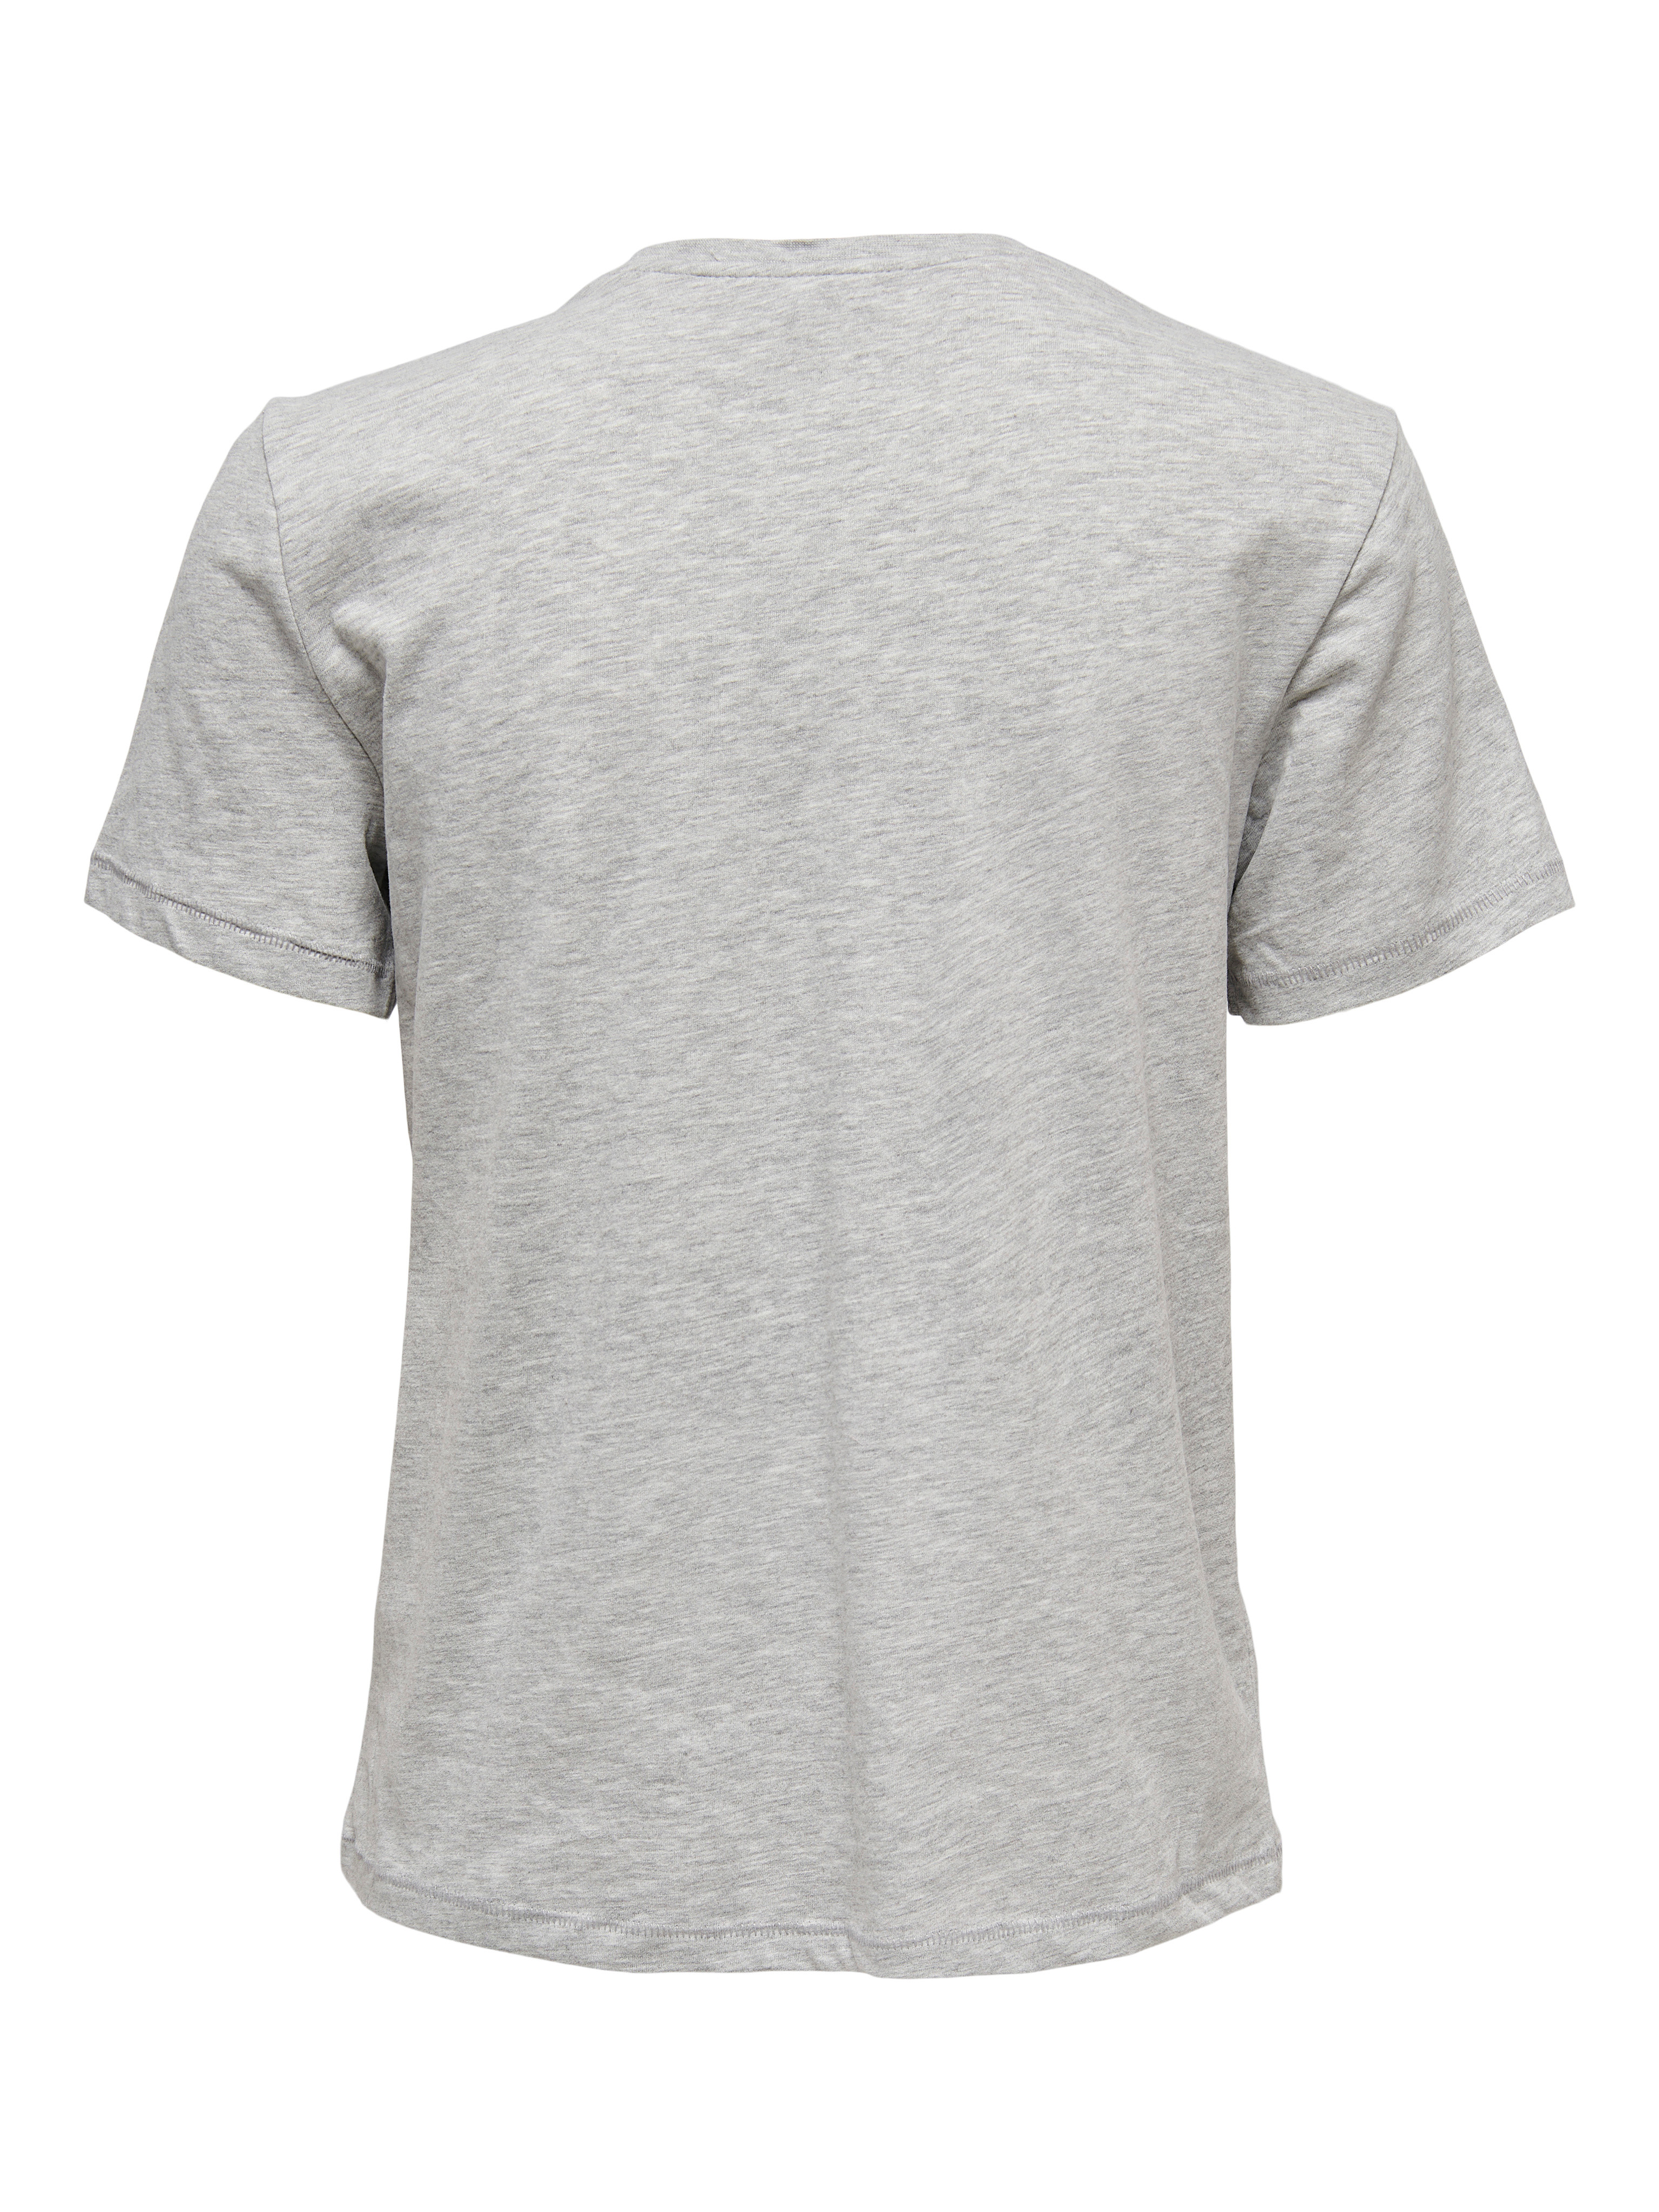 T-shirt with print, Grey, large image number 1